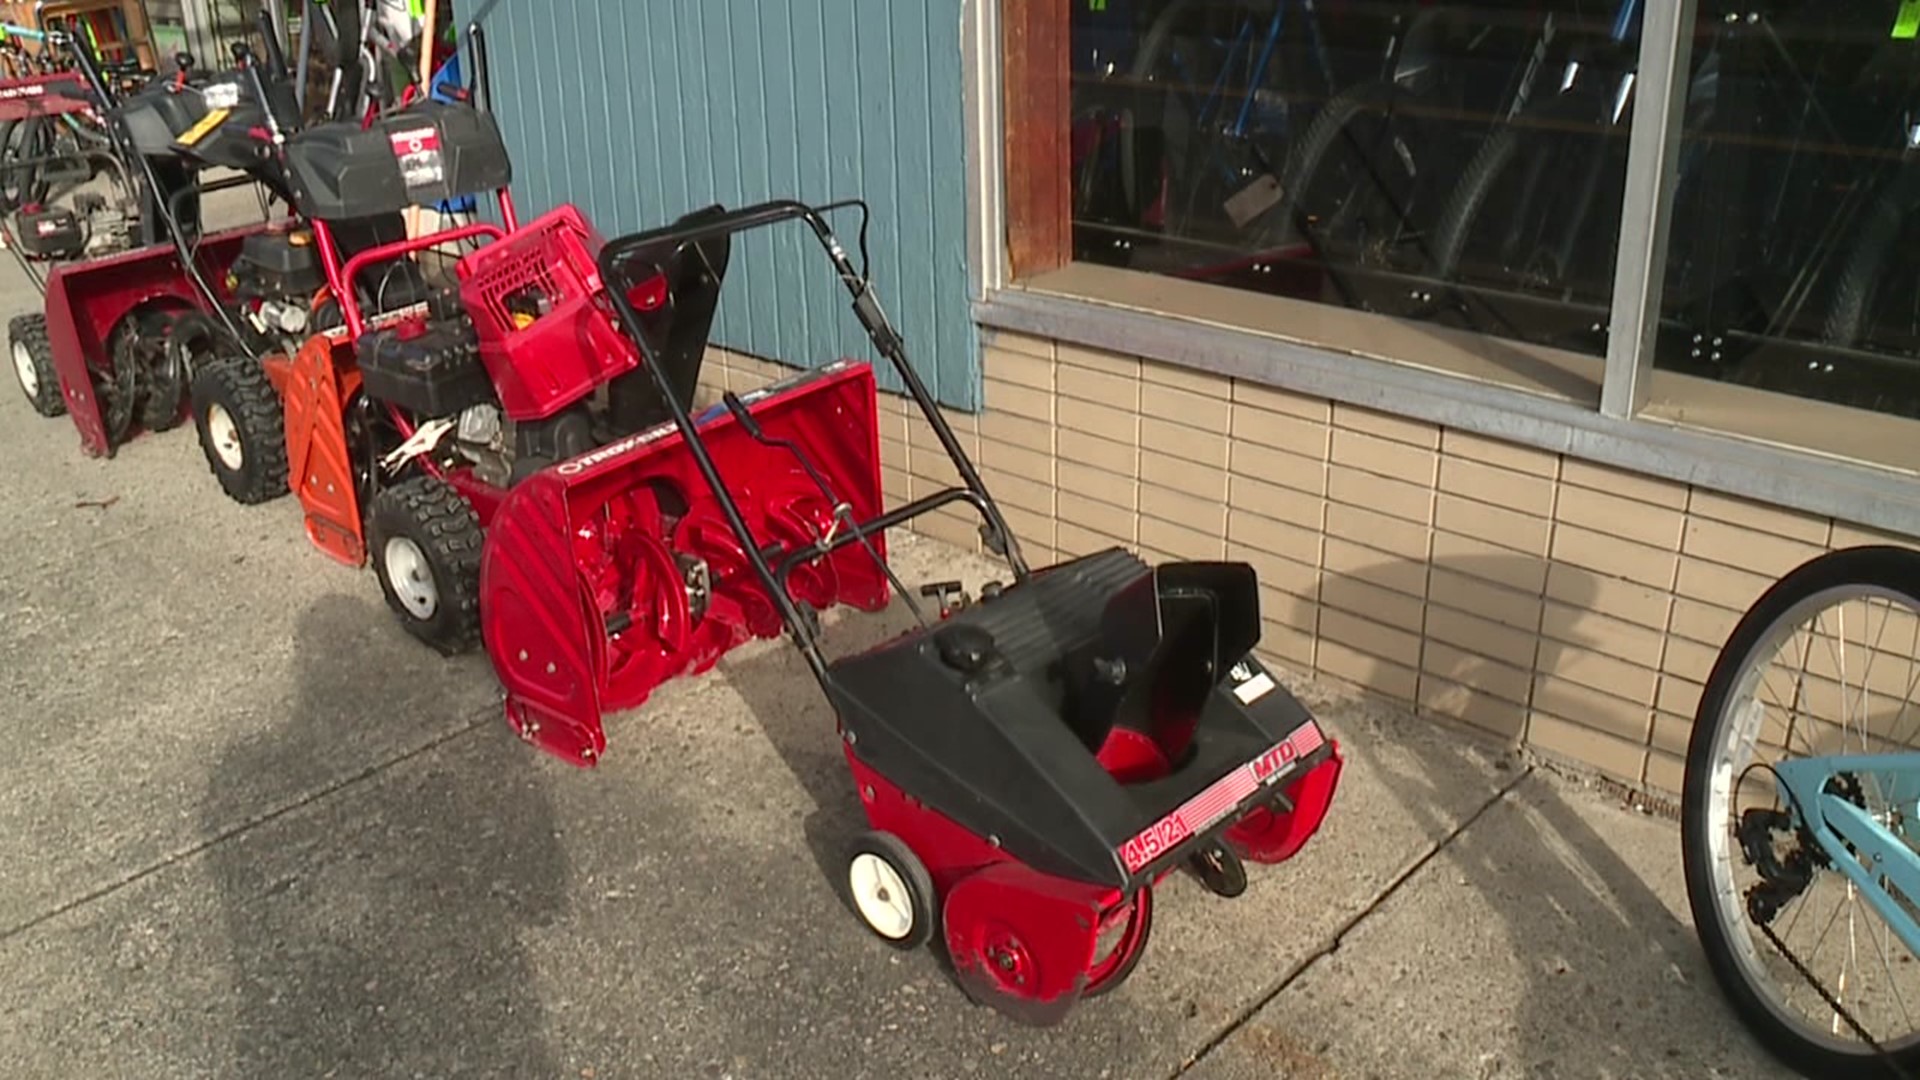 With the first big snow of the season comes the time to dust off those snowblowers.